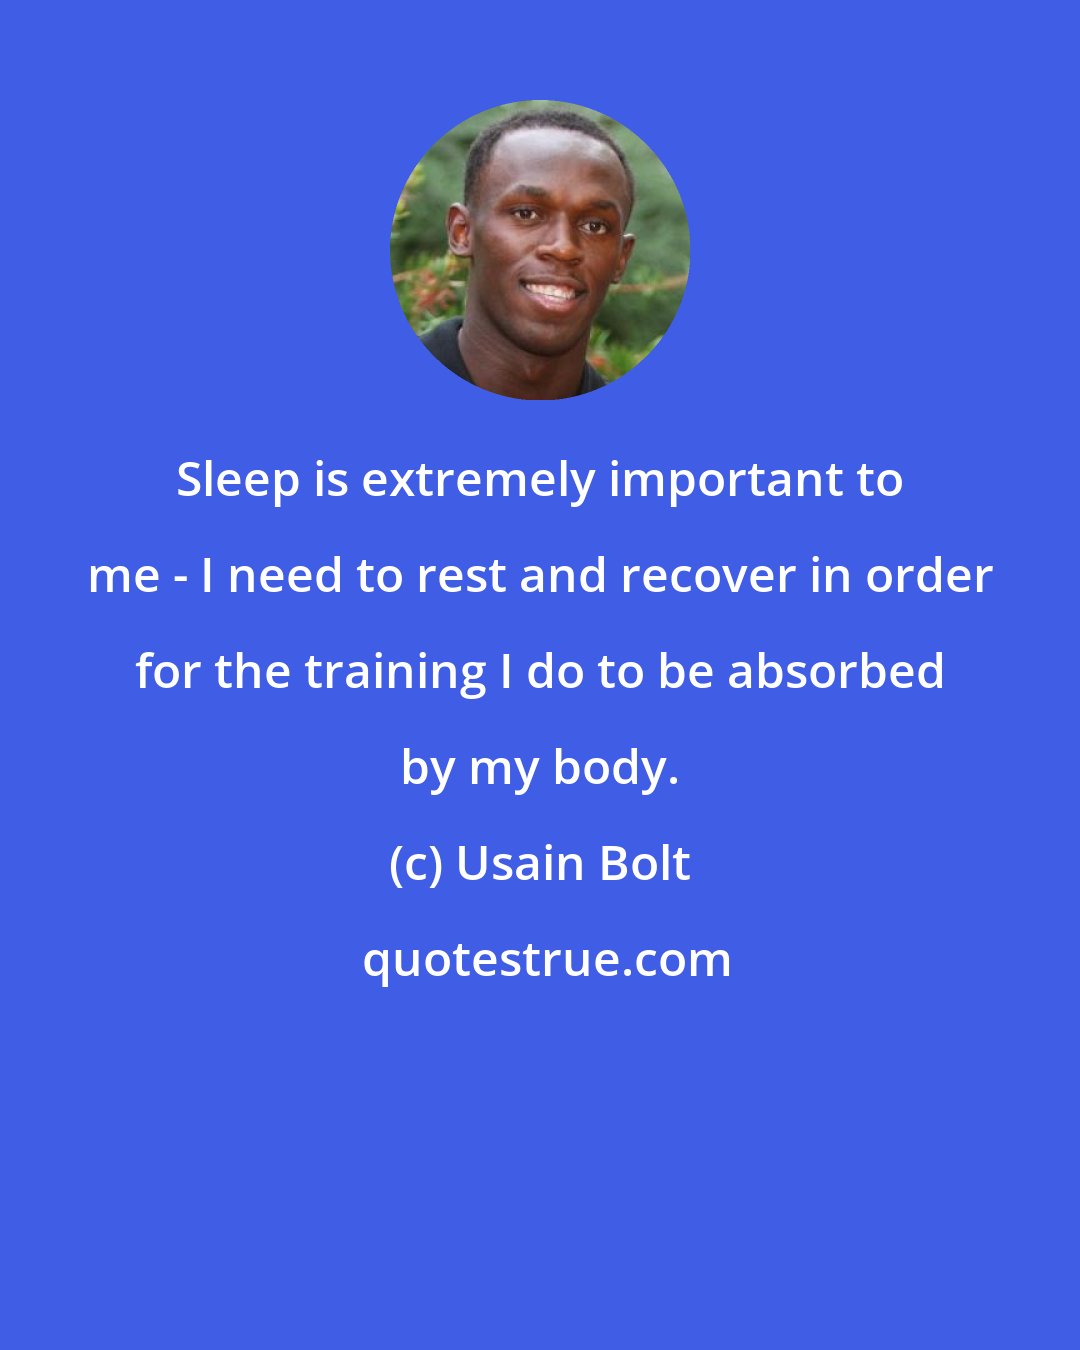 Usain Bolt: Sleep is extremely important to me - I need to rest and recover in order for the training I do to be absorbed by my body.